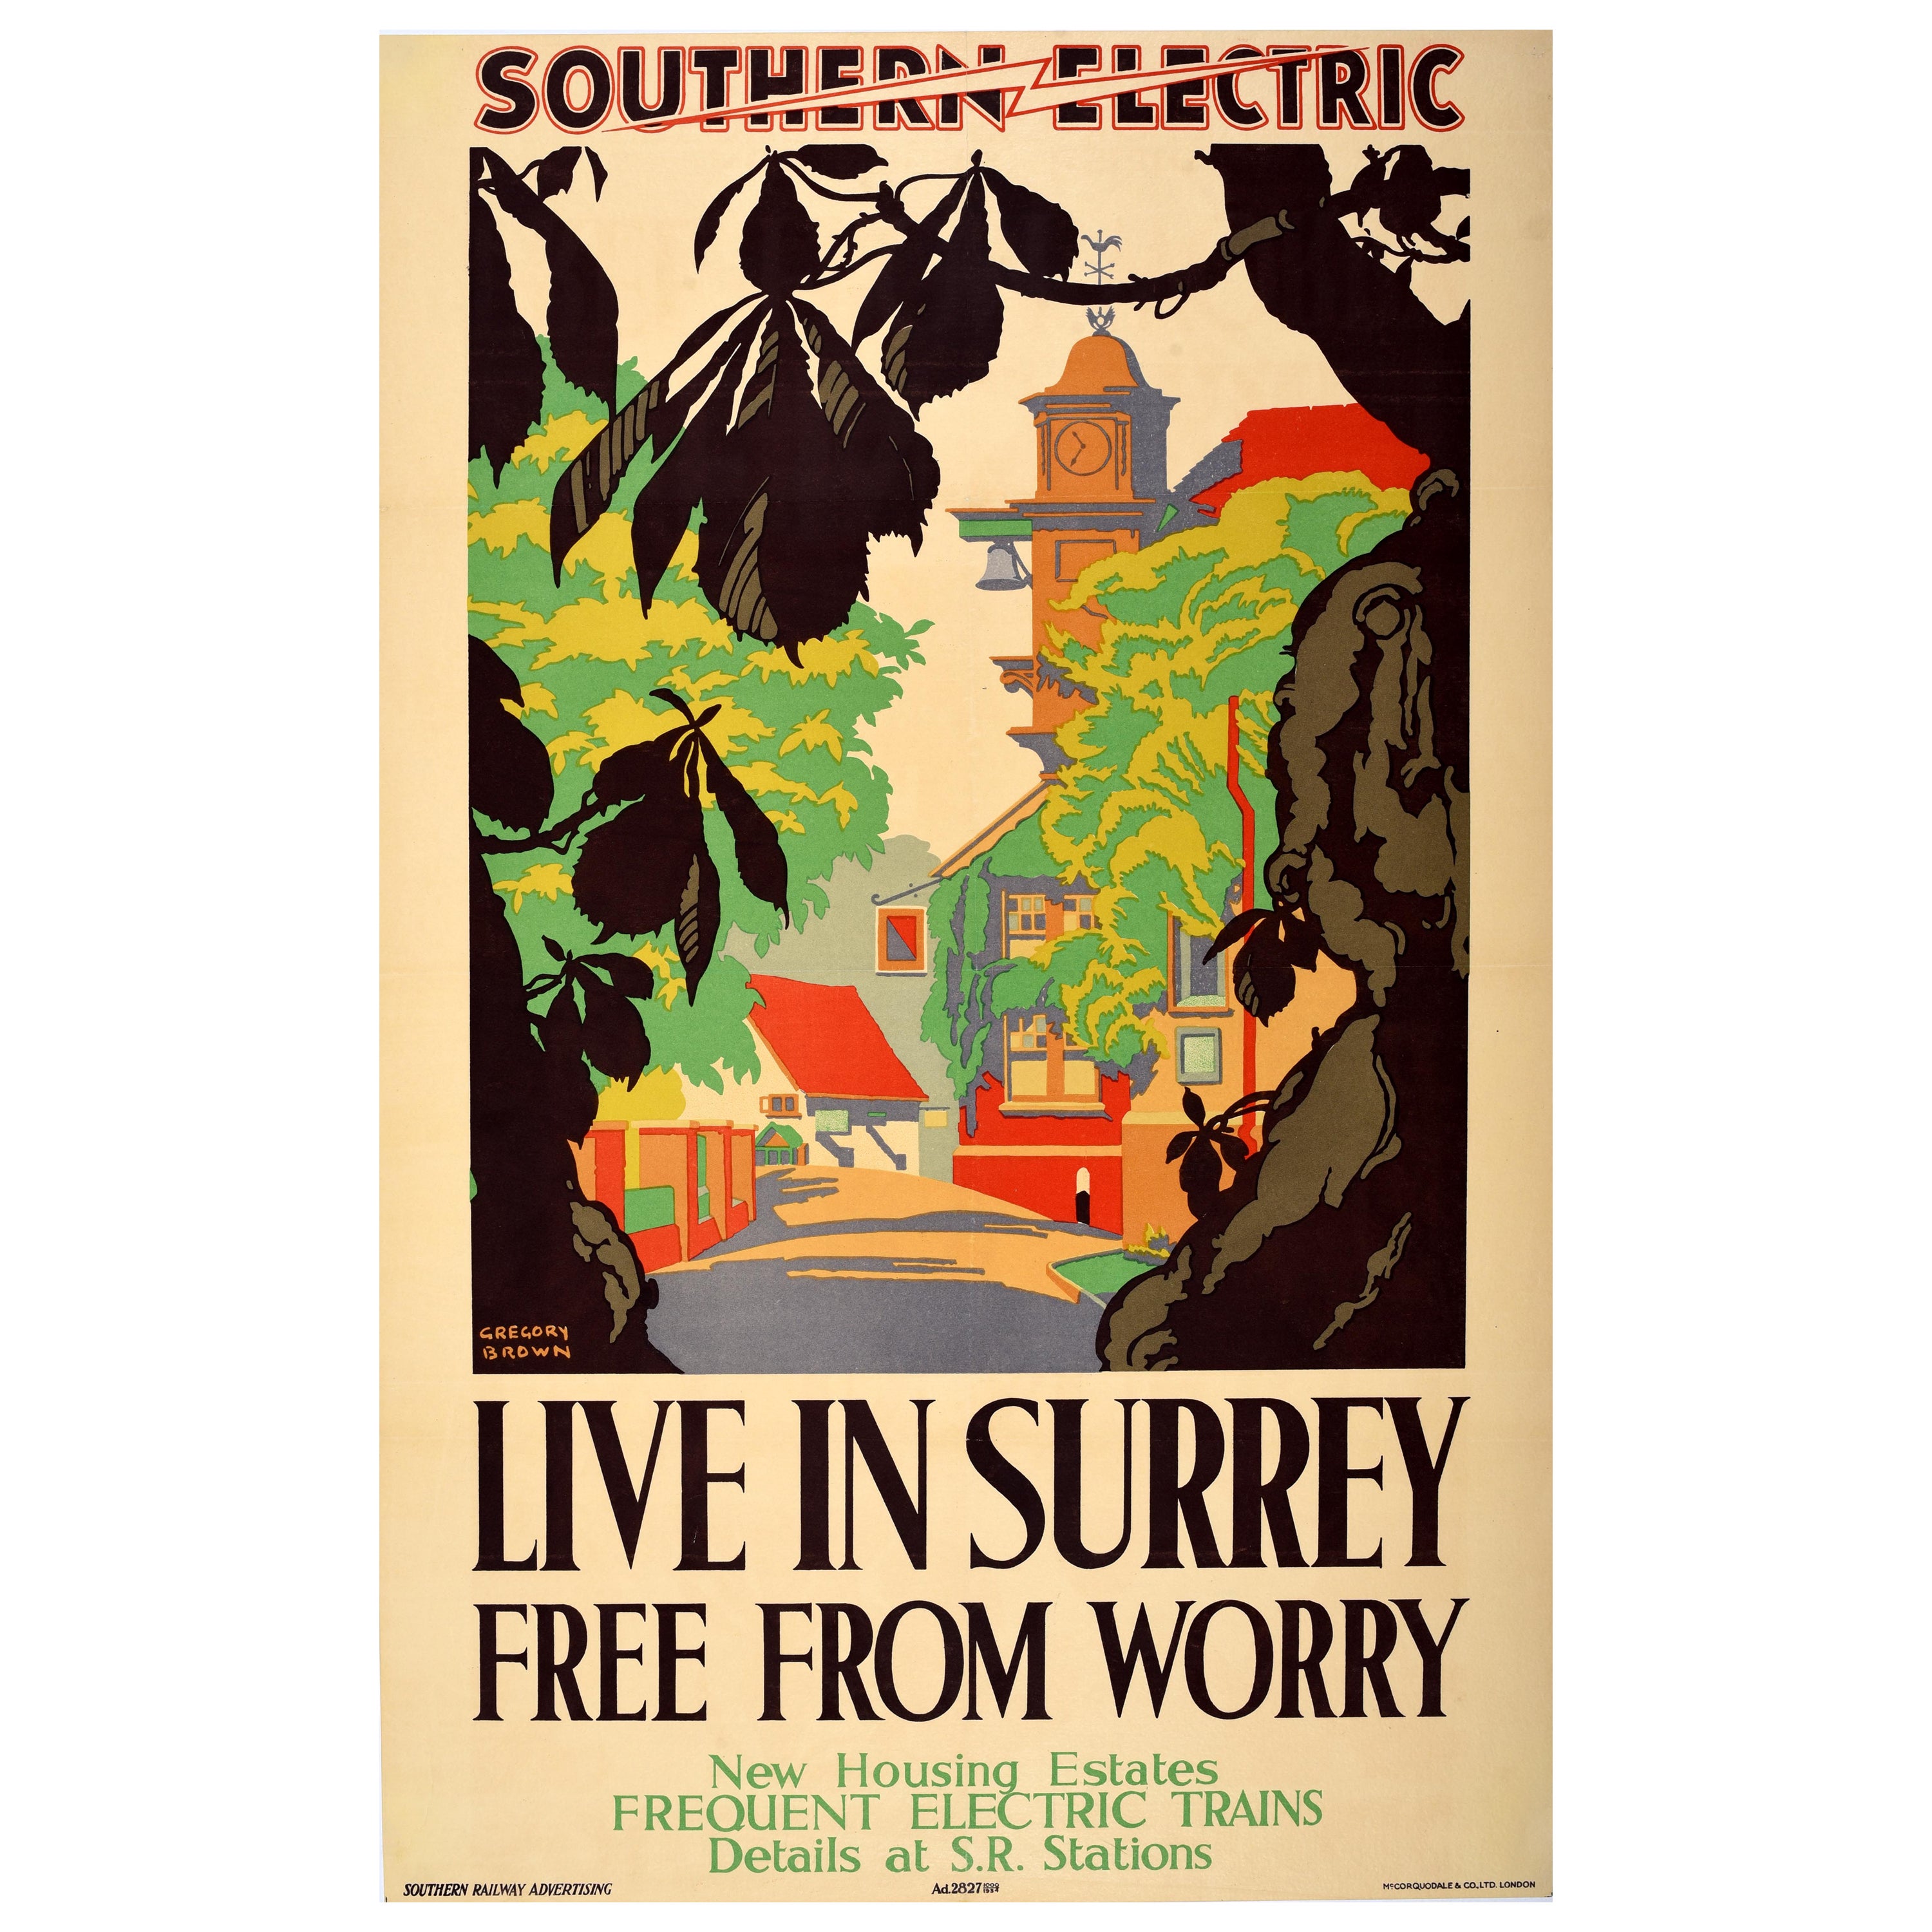 Original Vintage Travel Poster Live In Surrey Free From Worry Southern Electric